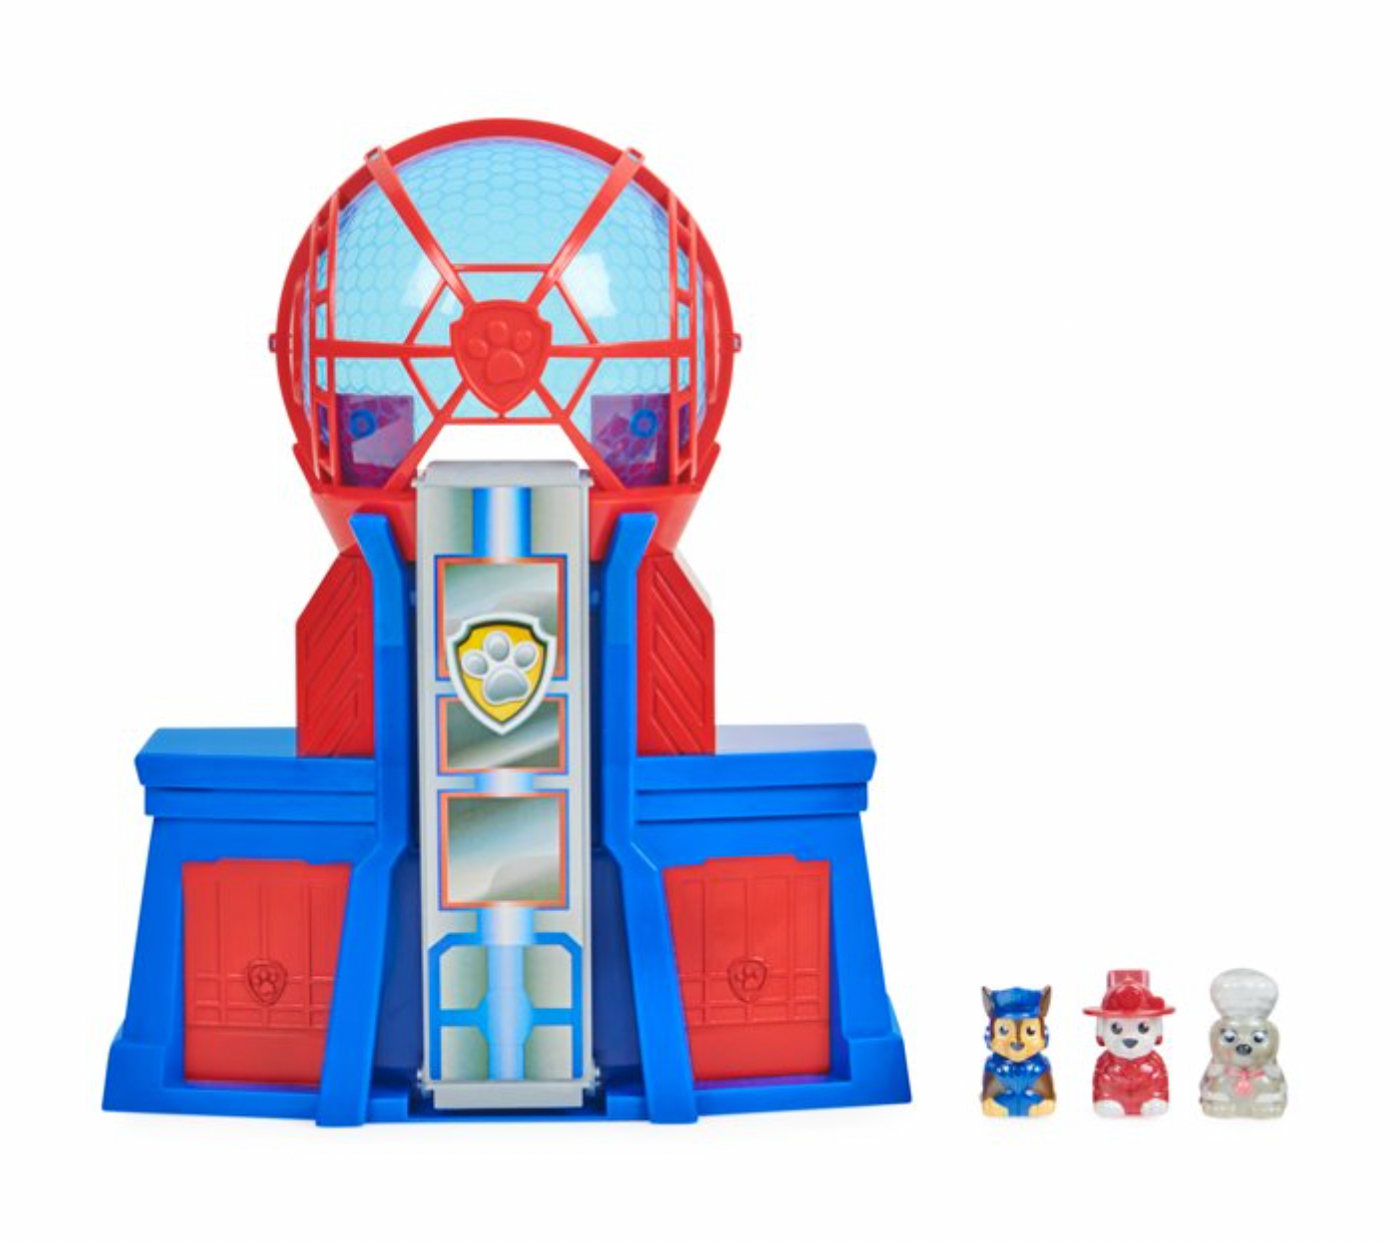 Paw Patrol The Movie Micro Movers City Tower Walmart Exclusive Toy Figures New